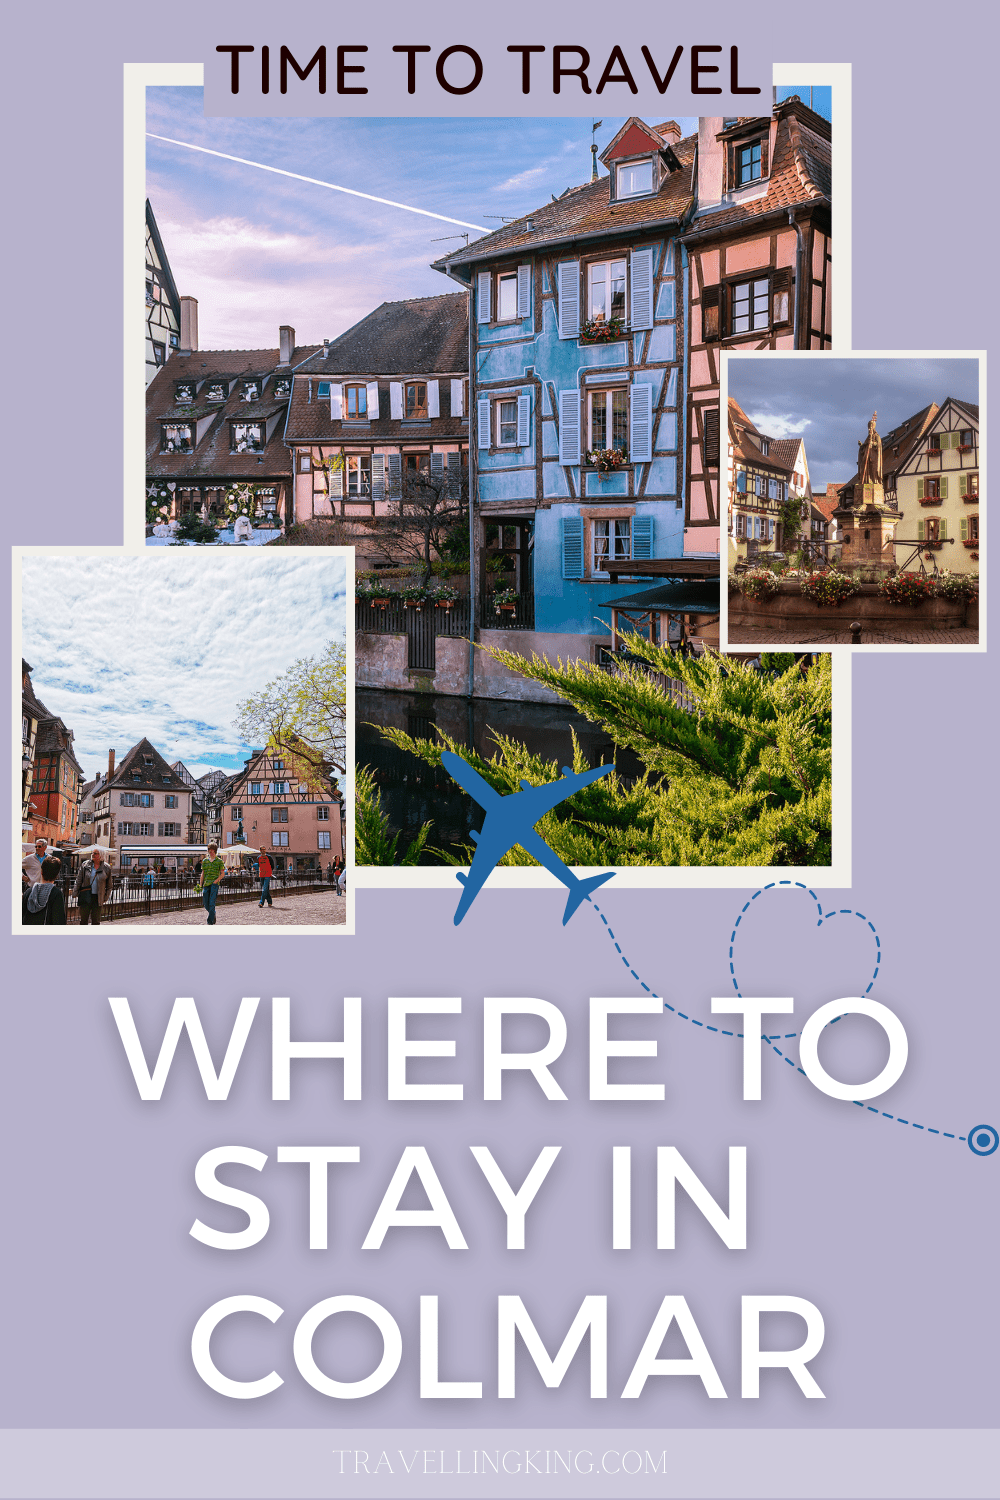 Where to stay in Colmar